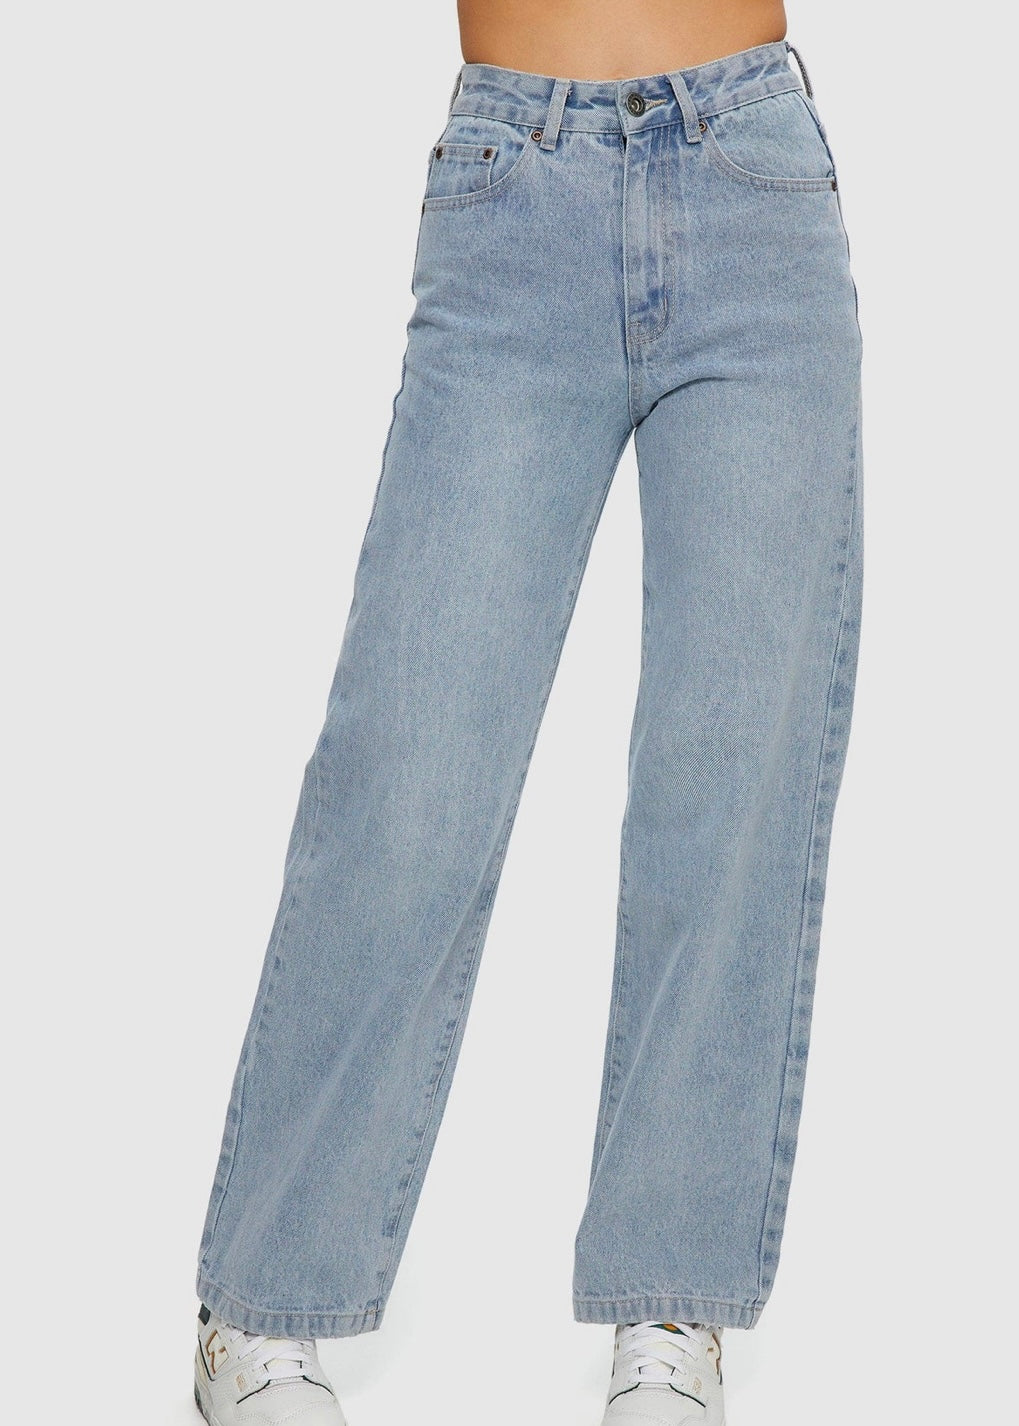 Midweight Denim High Rise Arc (Button Fly) - Vintage Tint